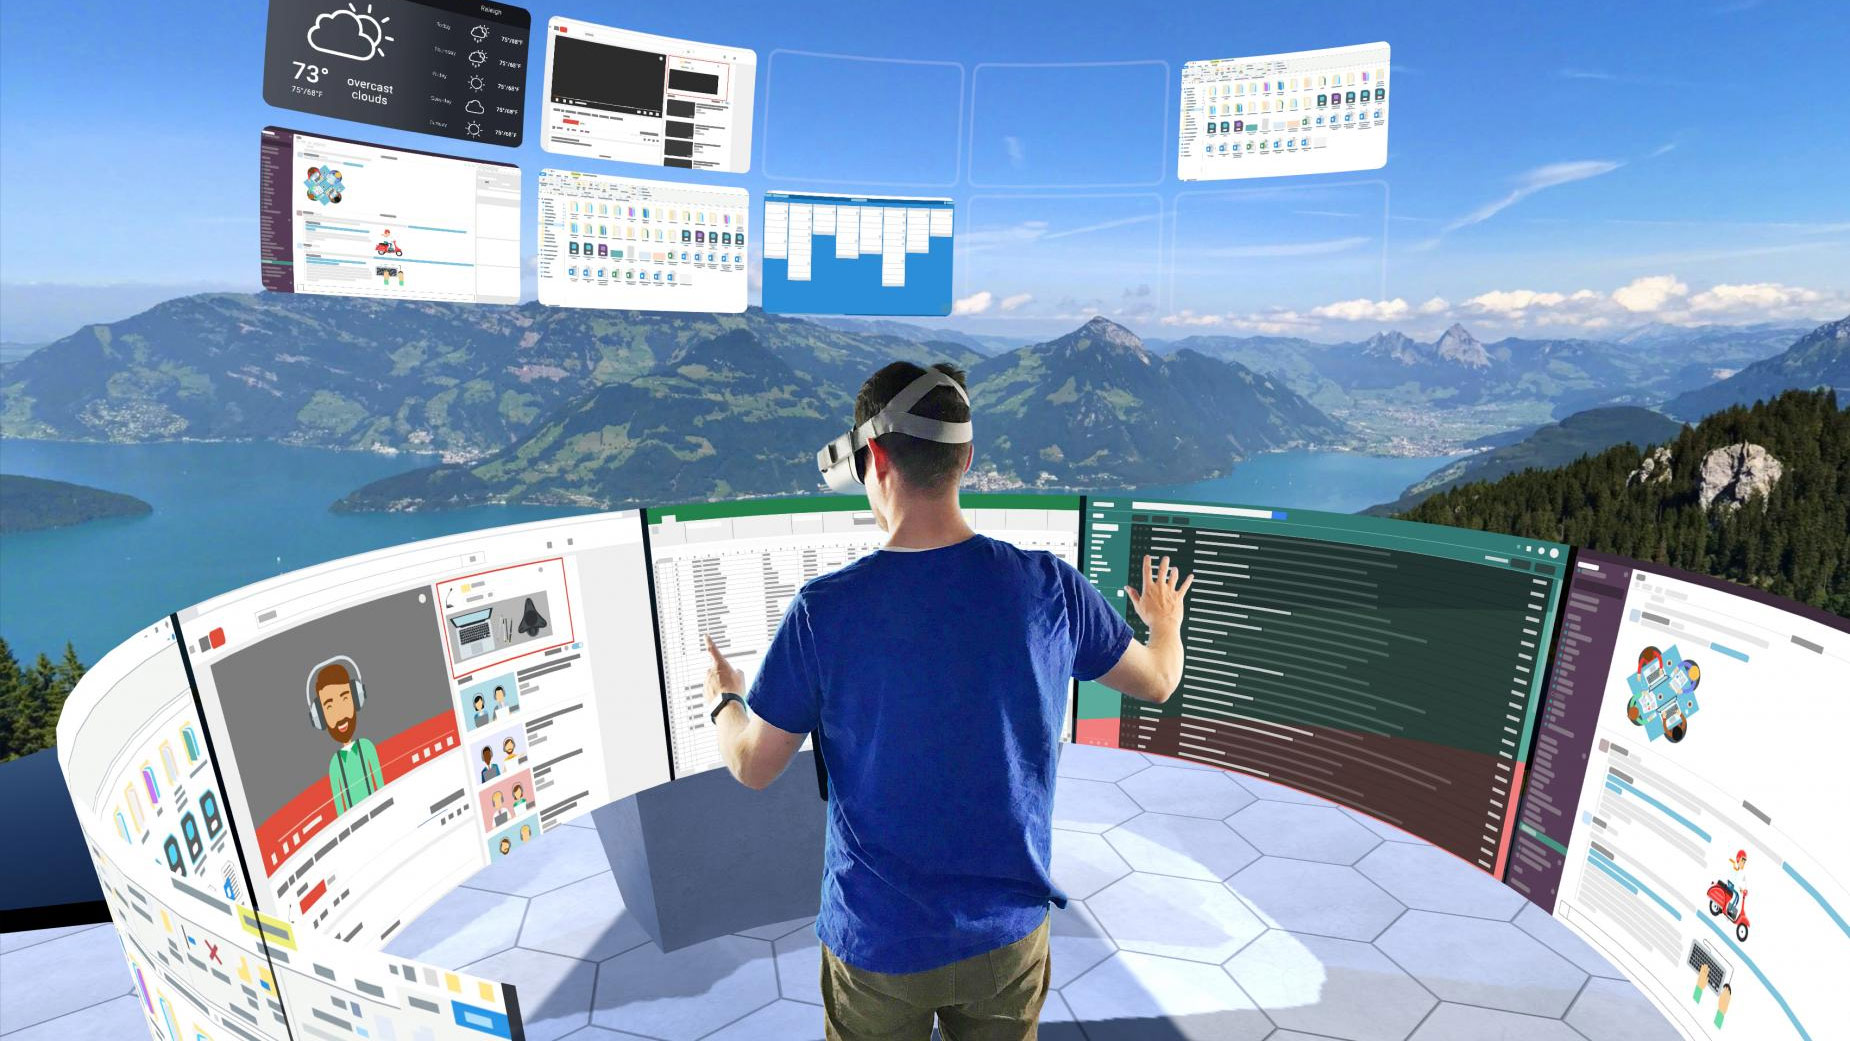 The Office of the Future: Virtual, Portable, and Global - Microsoft Research